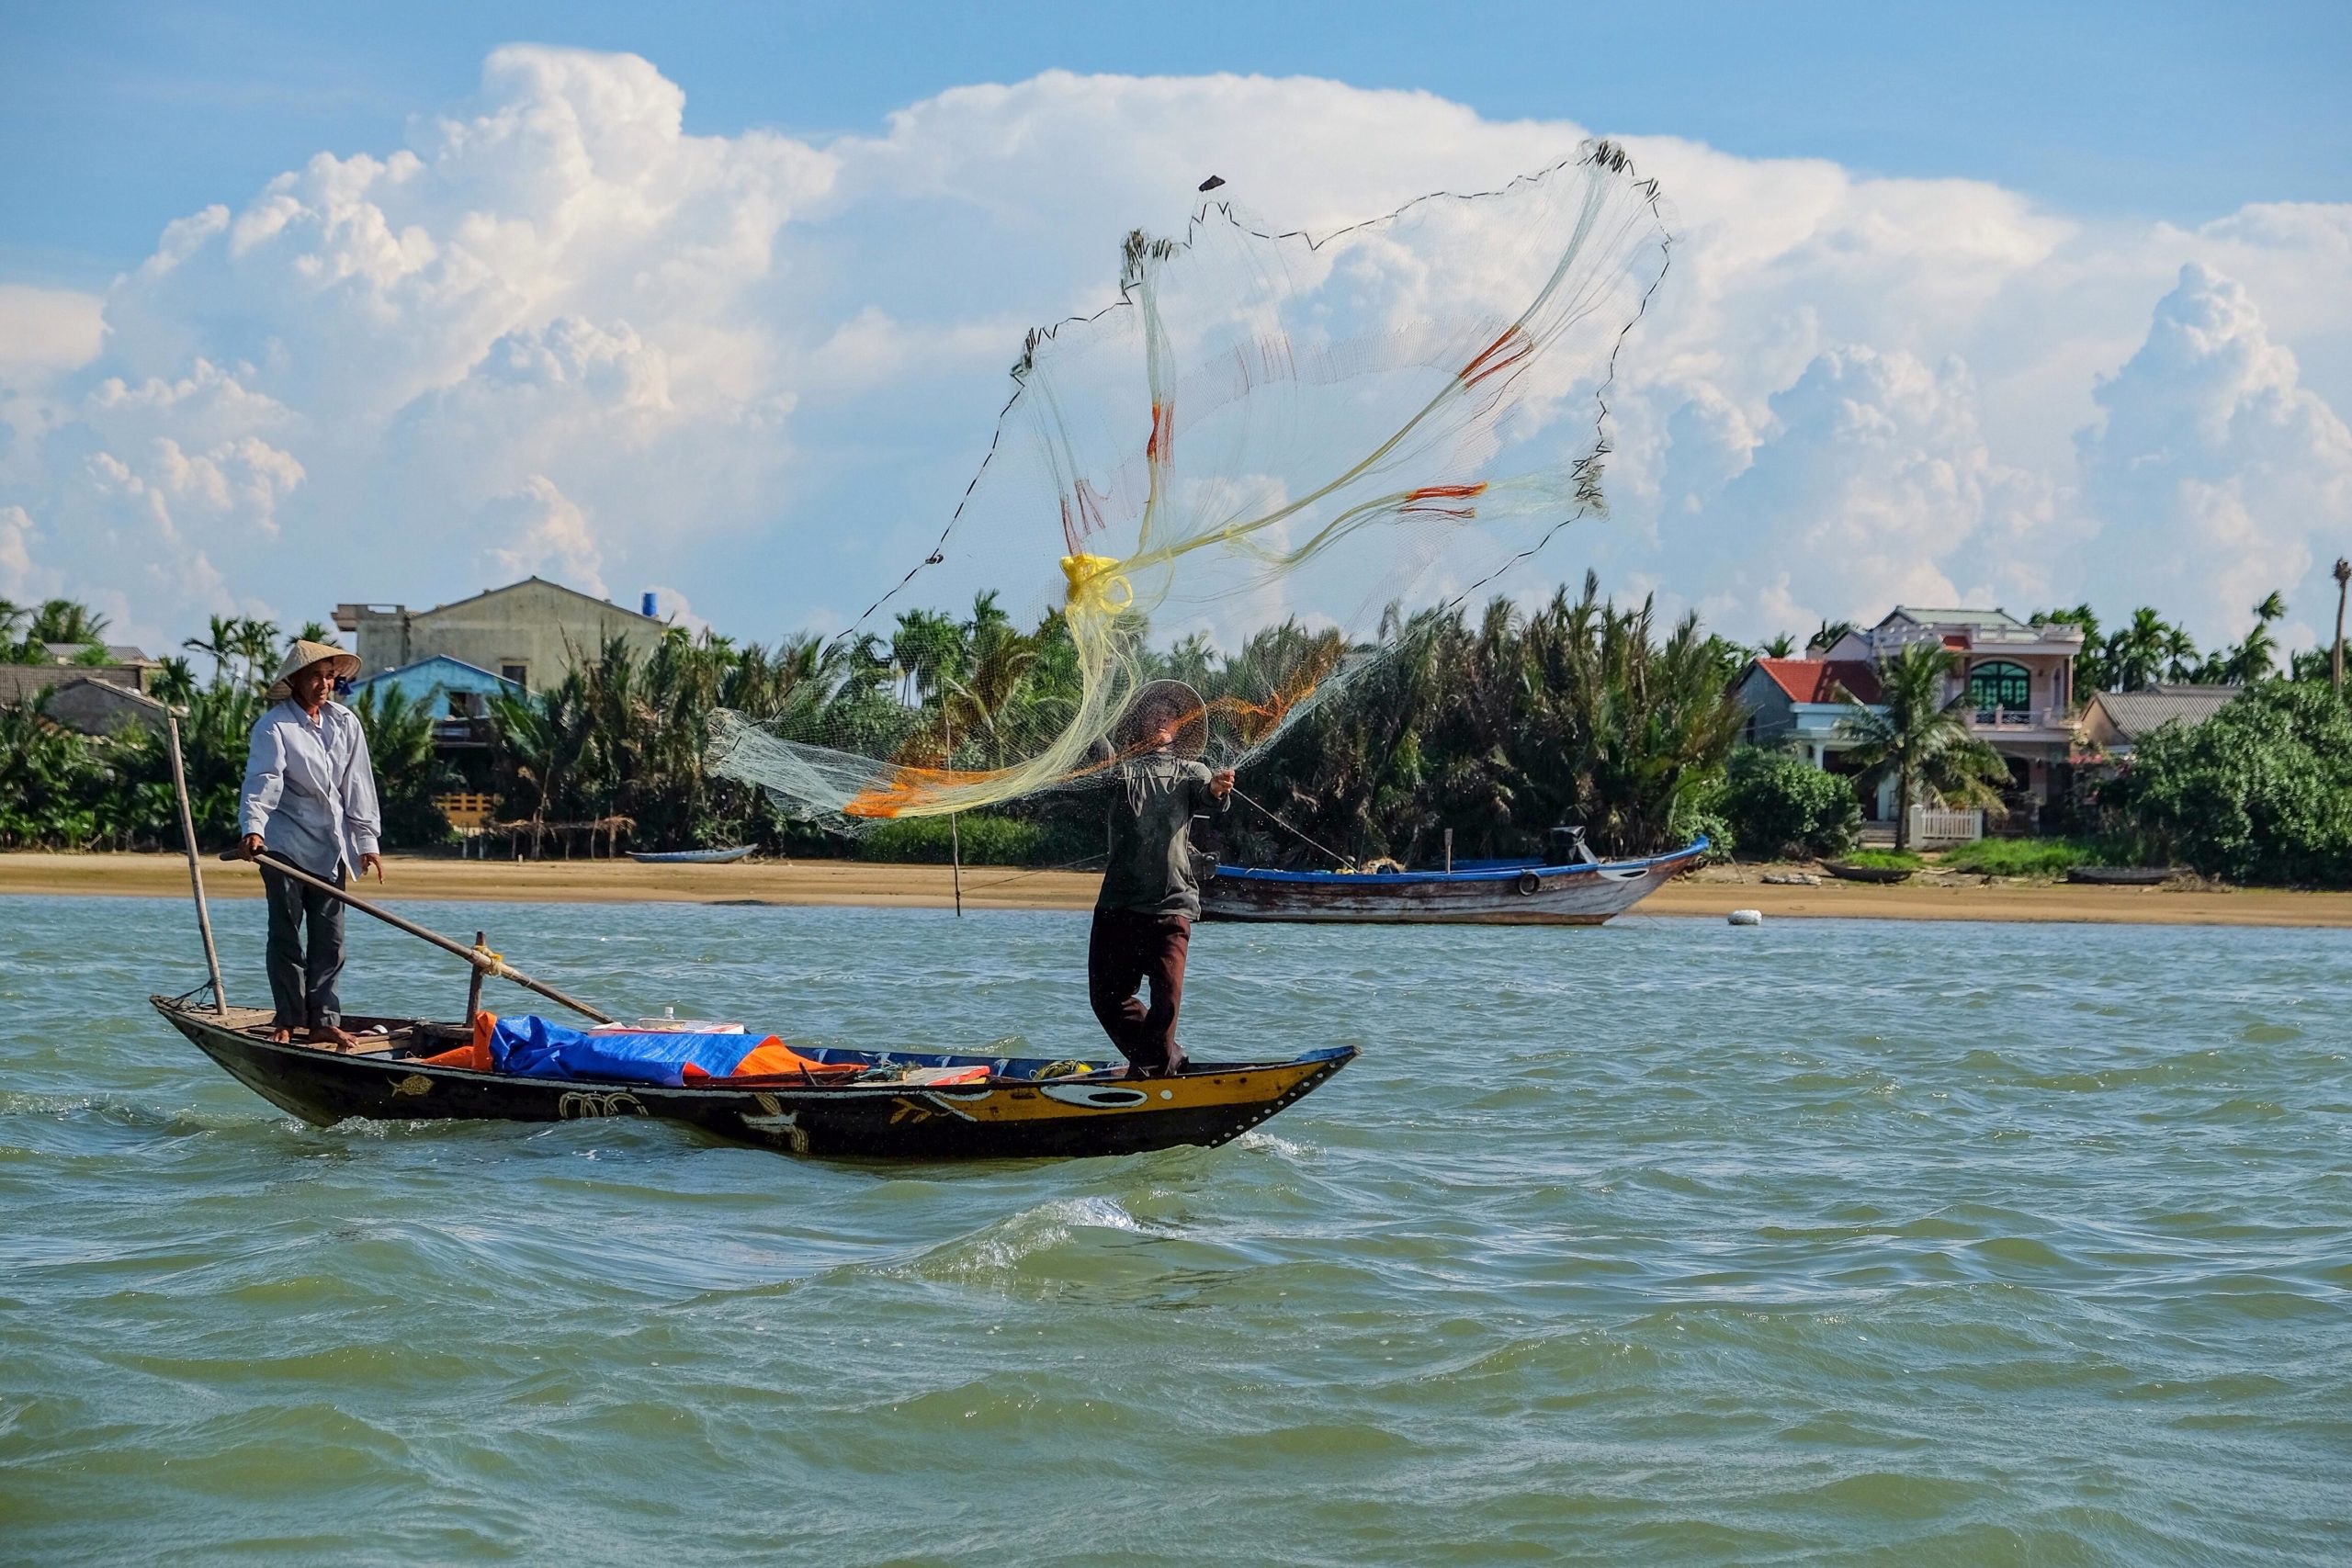 <p>Fishers on the Mekong river in Vietnam. Up to 60 million people depend on the Mekong for food and livelihoods. The 4,350-kilometre waterway originates in China before flowing through Myanmar, Laos, Thailand, Cambodia and Vietnam [Image: Alamy]</p>